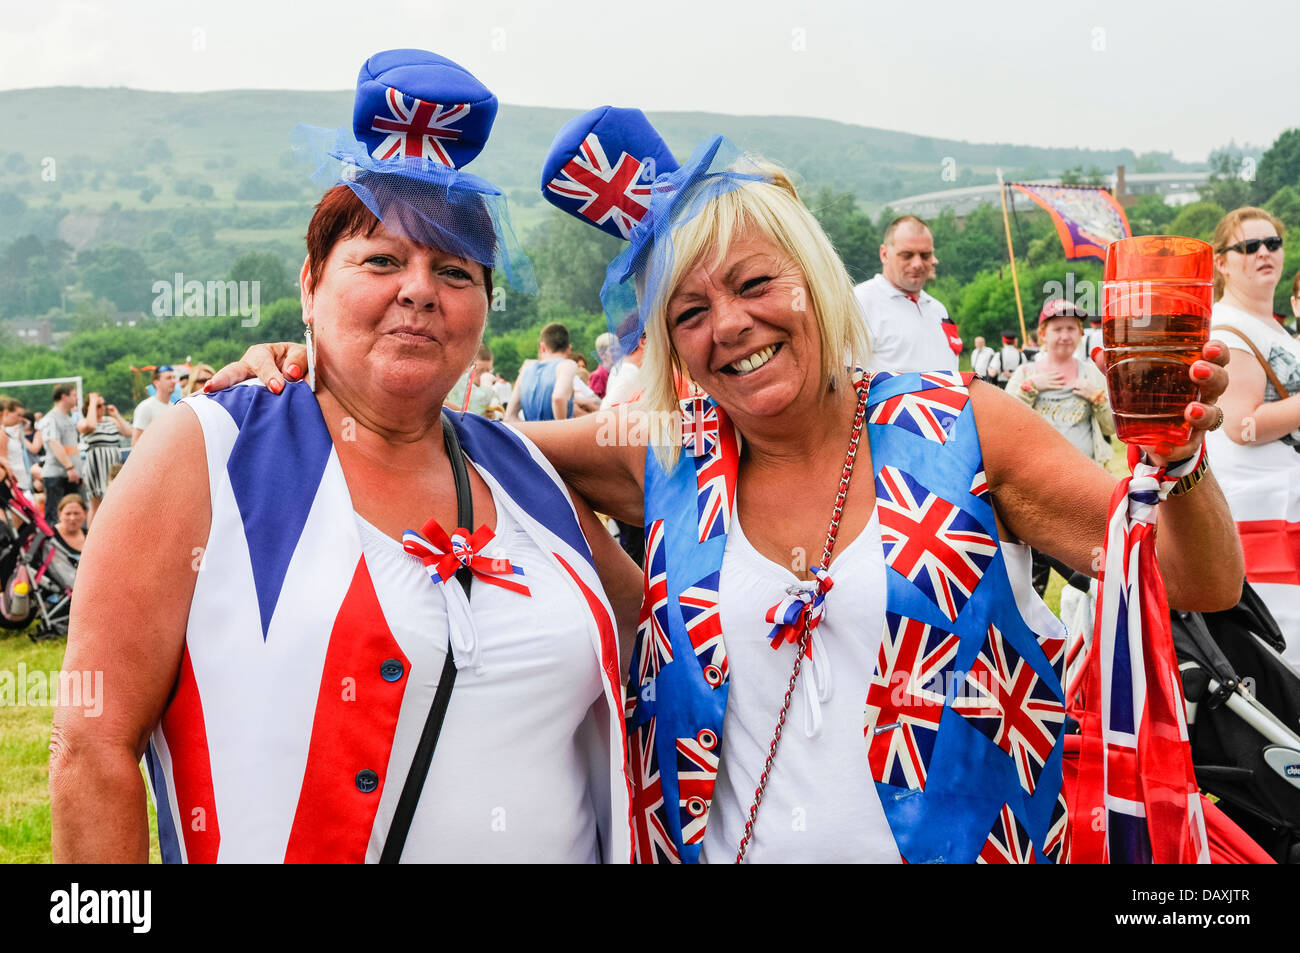 Two women watch the 12th July Orange Order parade wearing Union Flag clothing Stock Photo